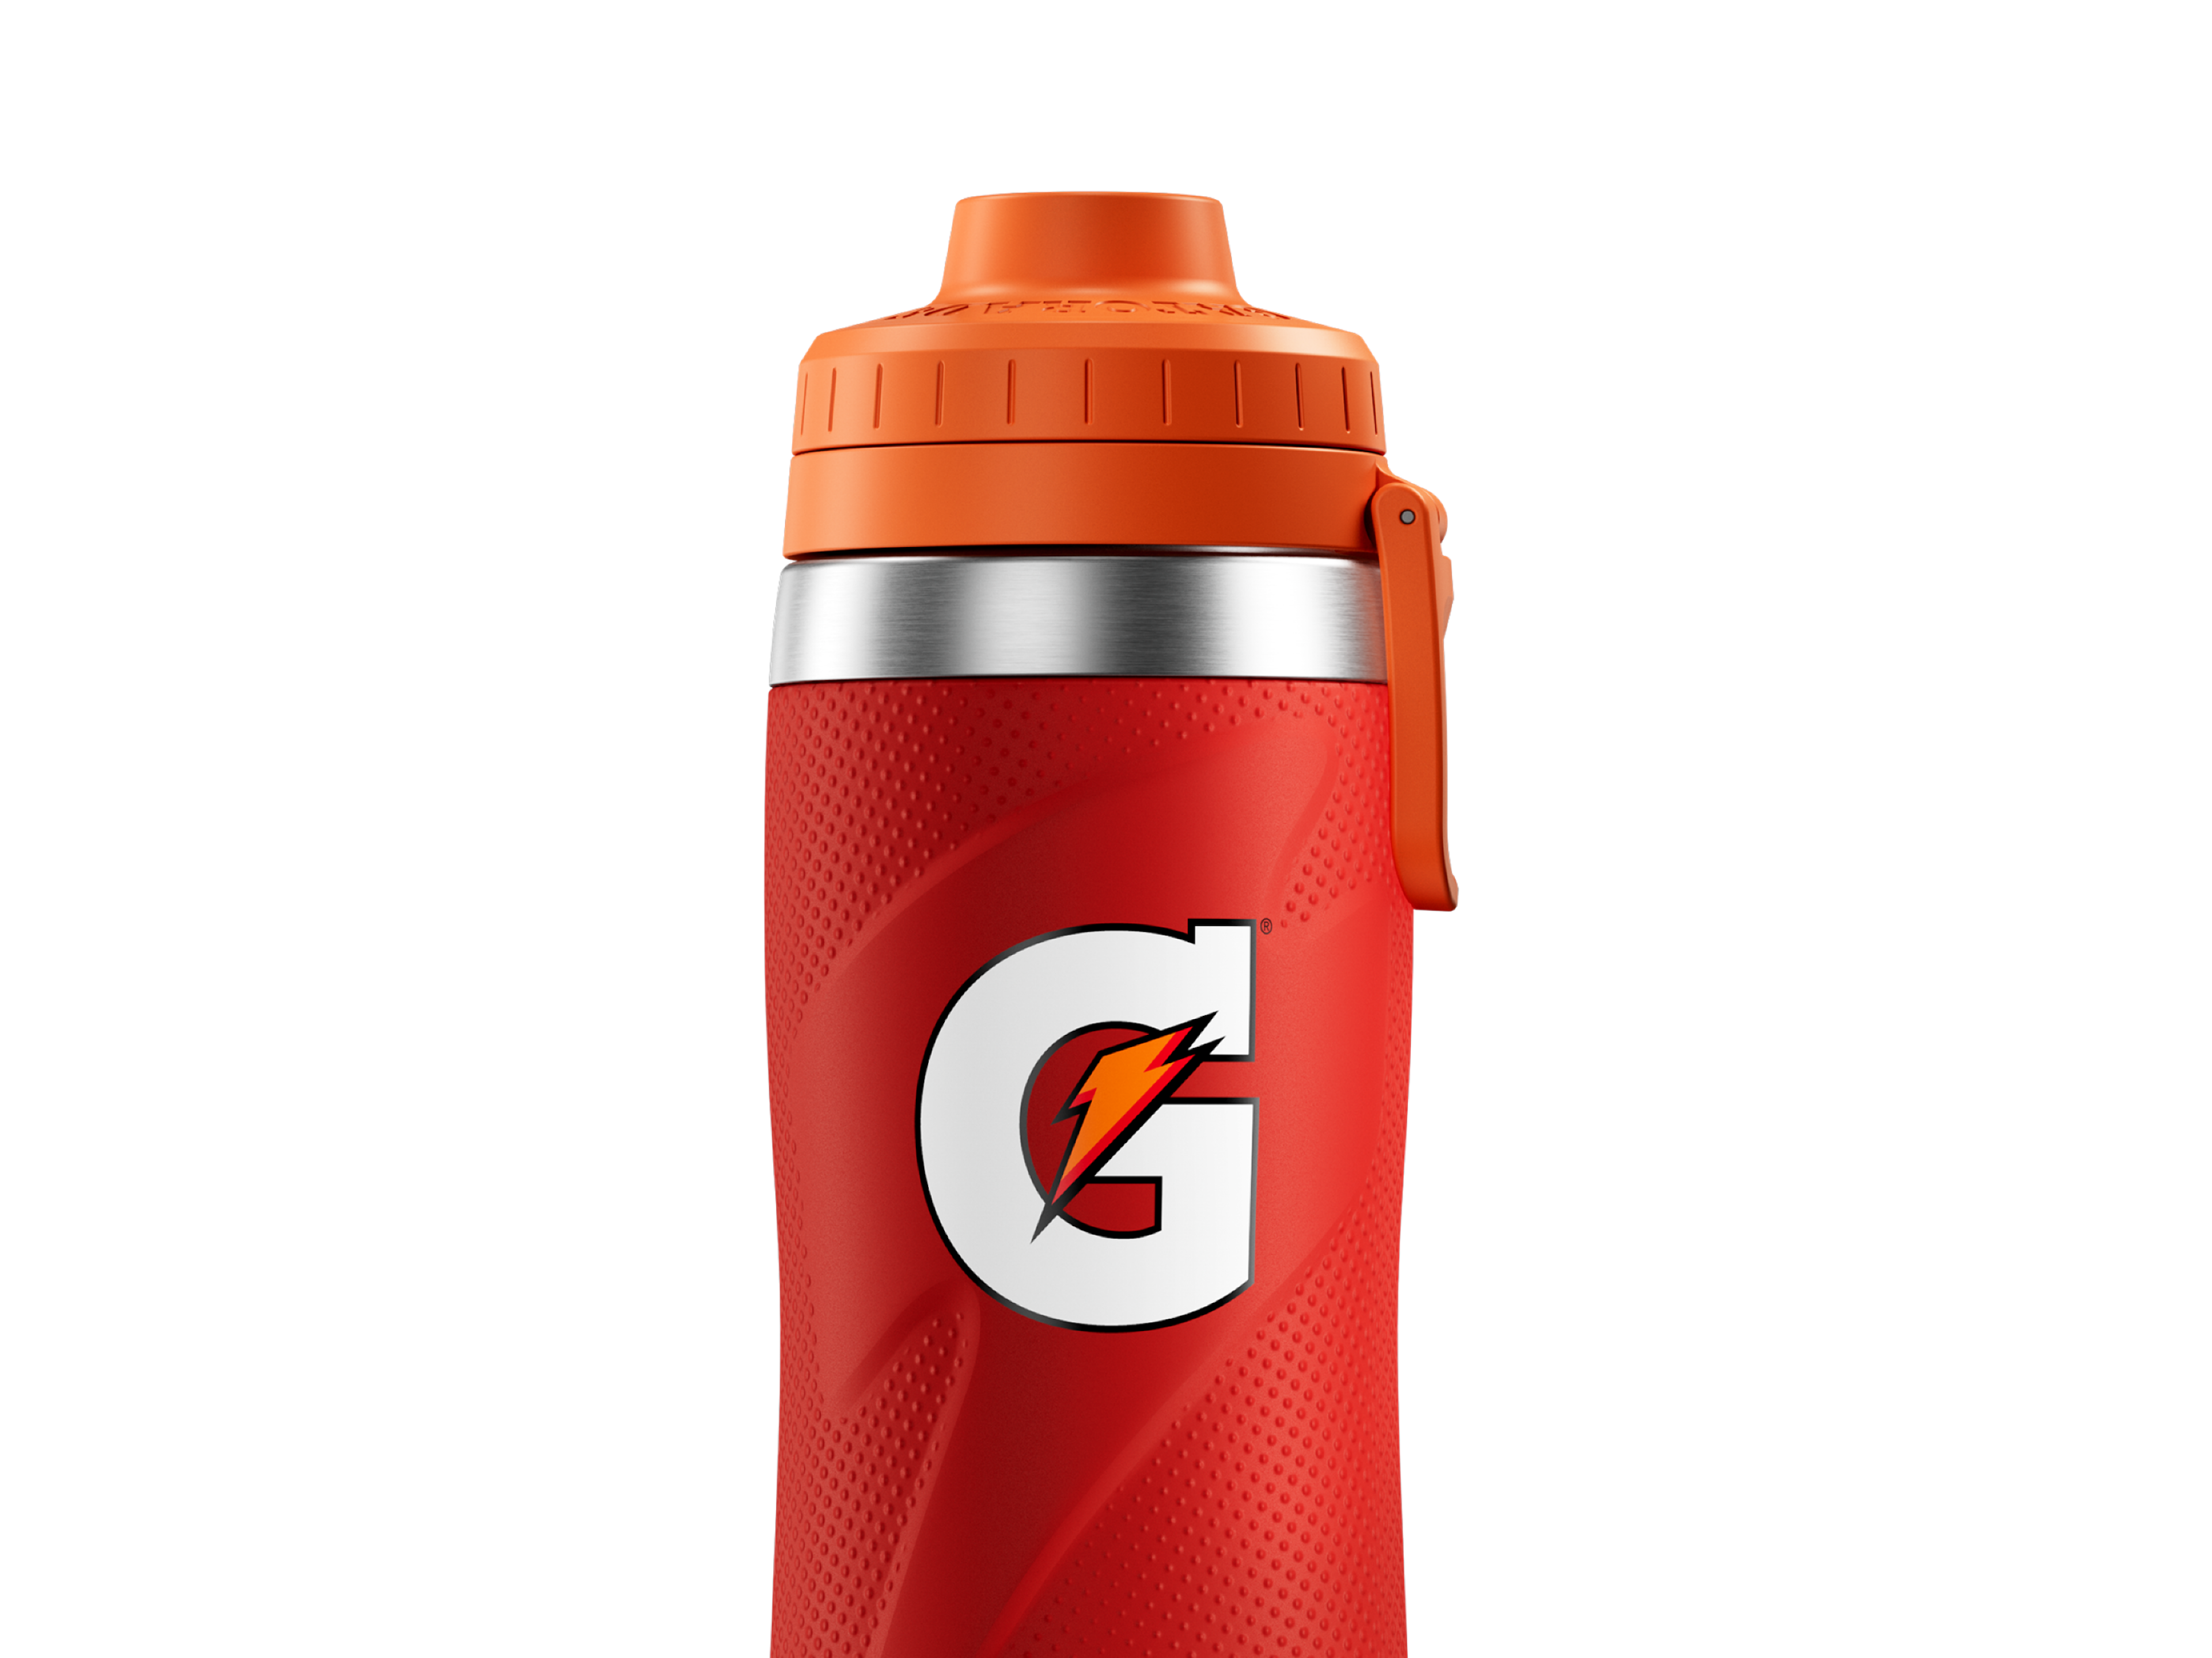 https://www.datocms-assets.com/101859/1691799590-stainlesssteelbottle_red_pdpwhat_desktop.png?auto=format&fit=max&w=3840